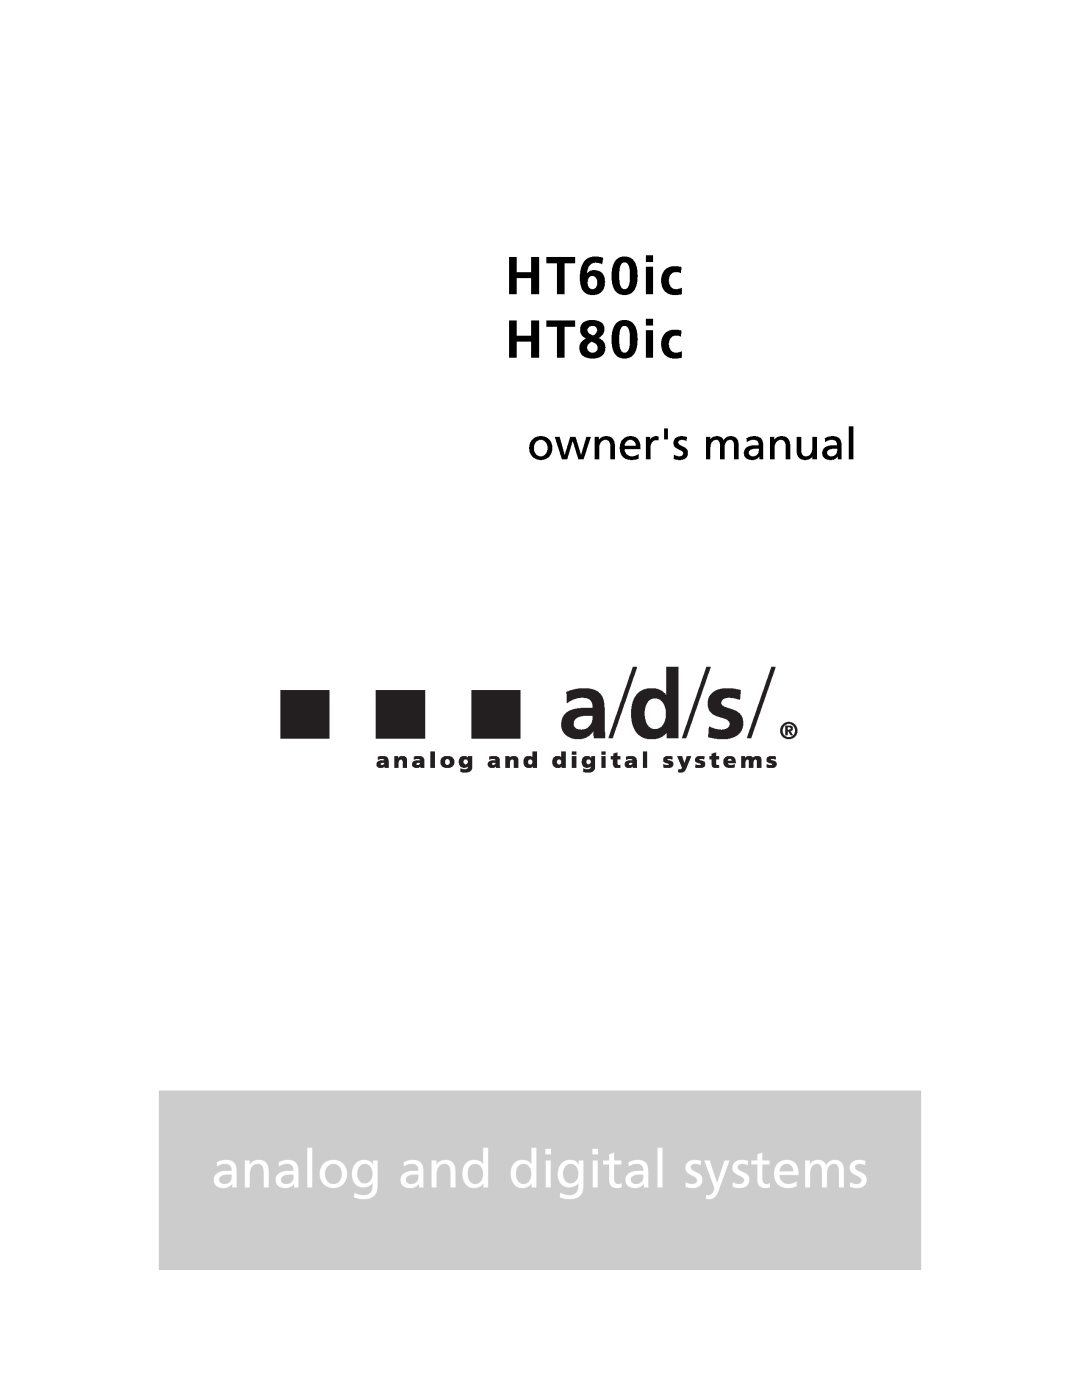 Directed Electronics owner manual analog and digital systems, HT60ic HT80ic 